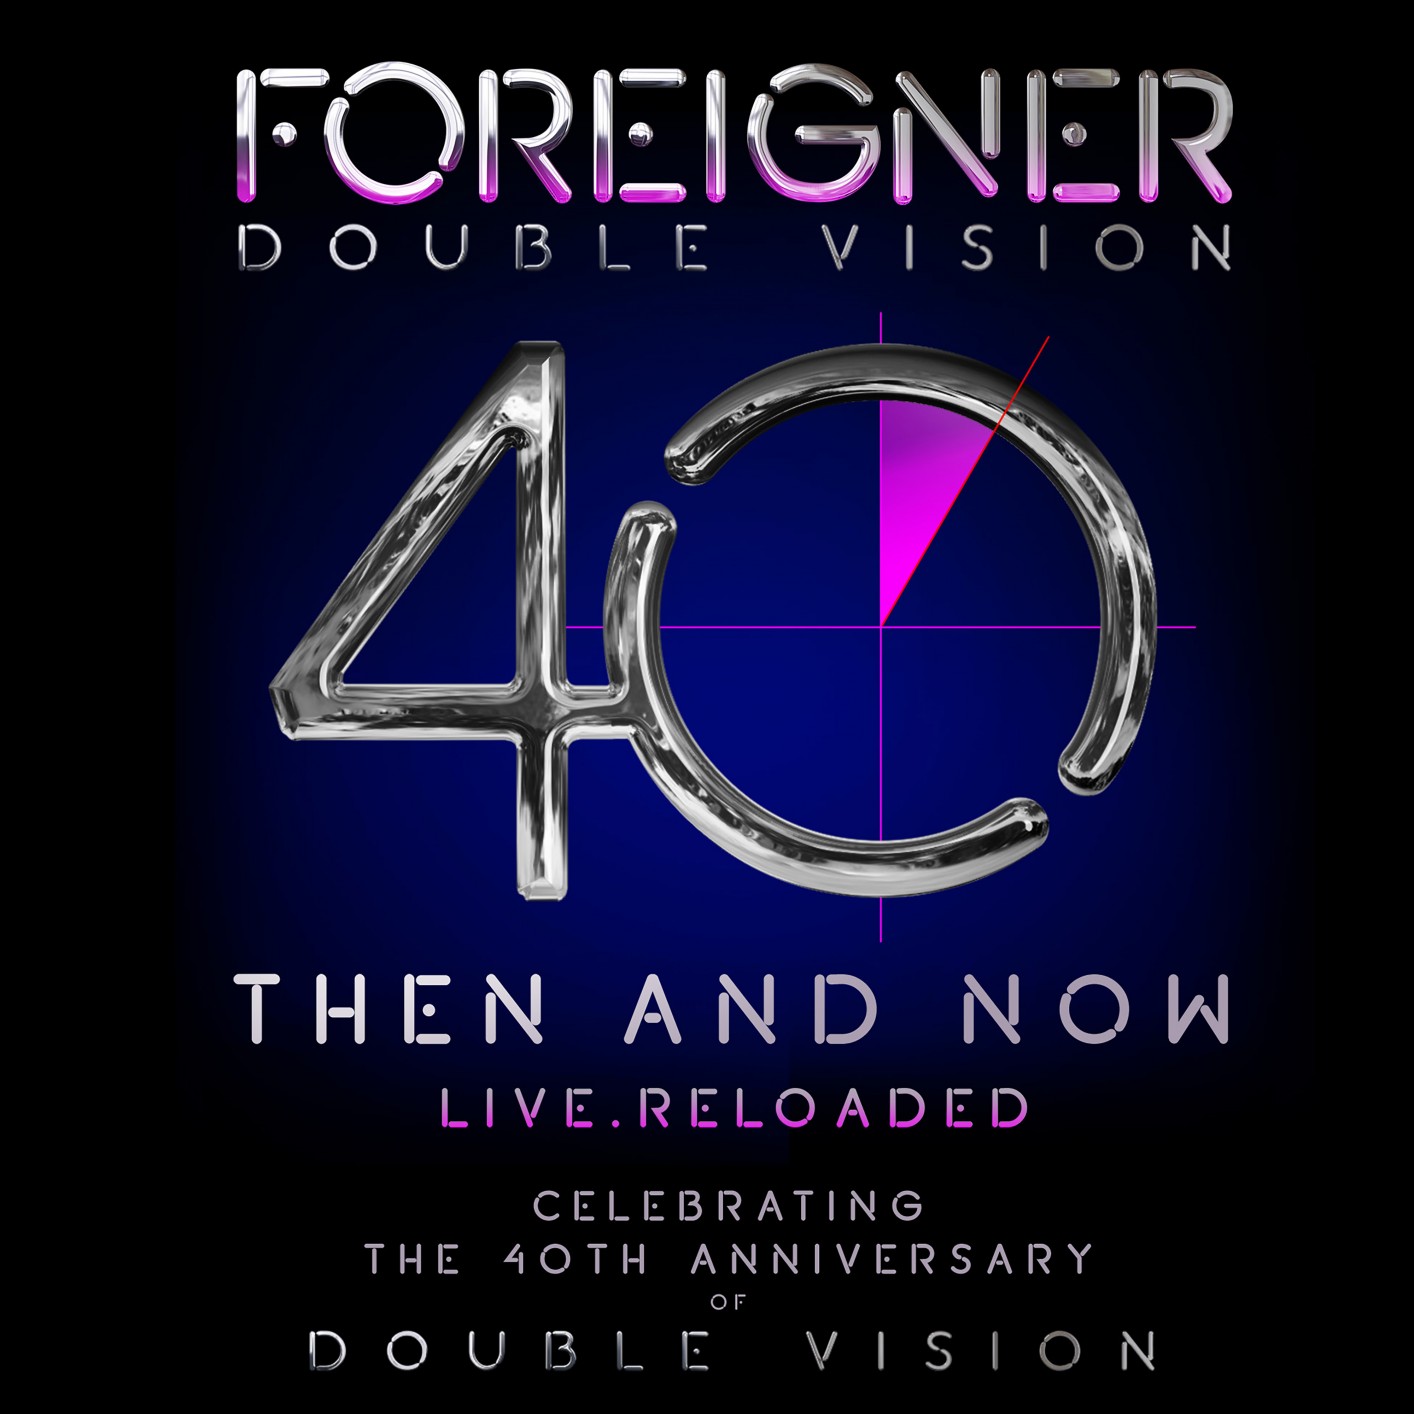 Foreigner – Double Vision: Then and Now (2019) [FLAC 24bit/96kHz]